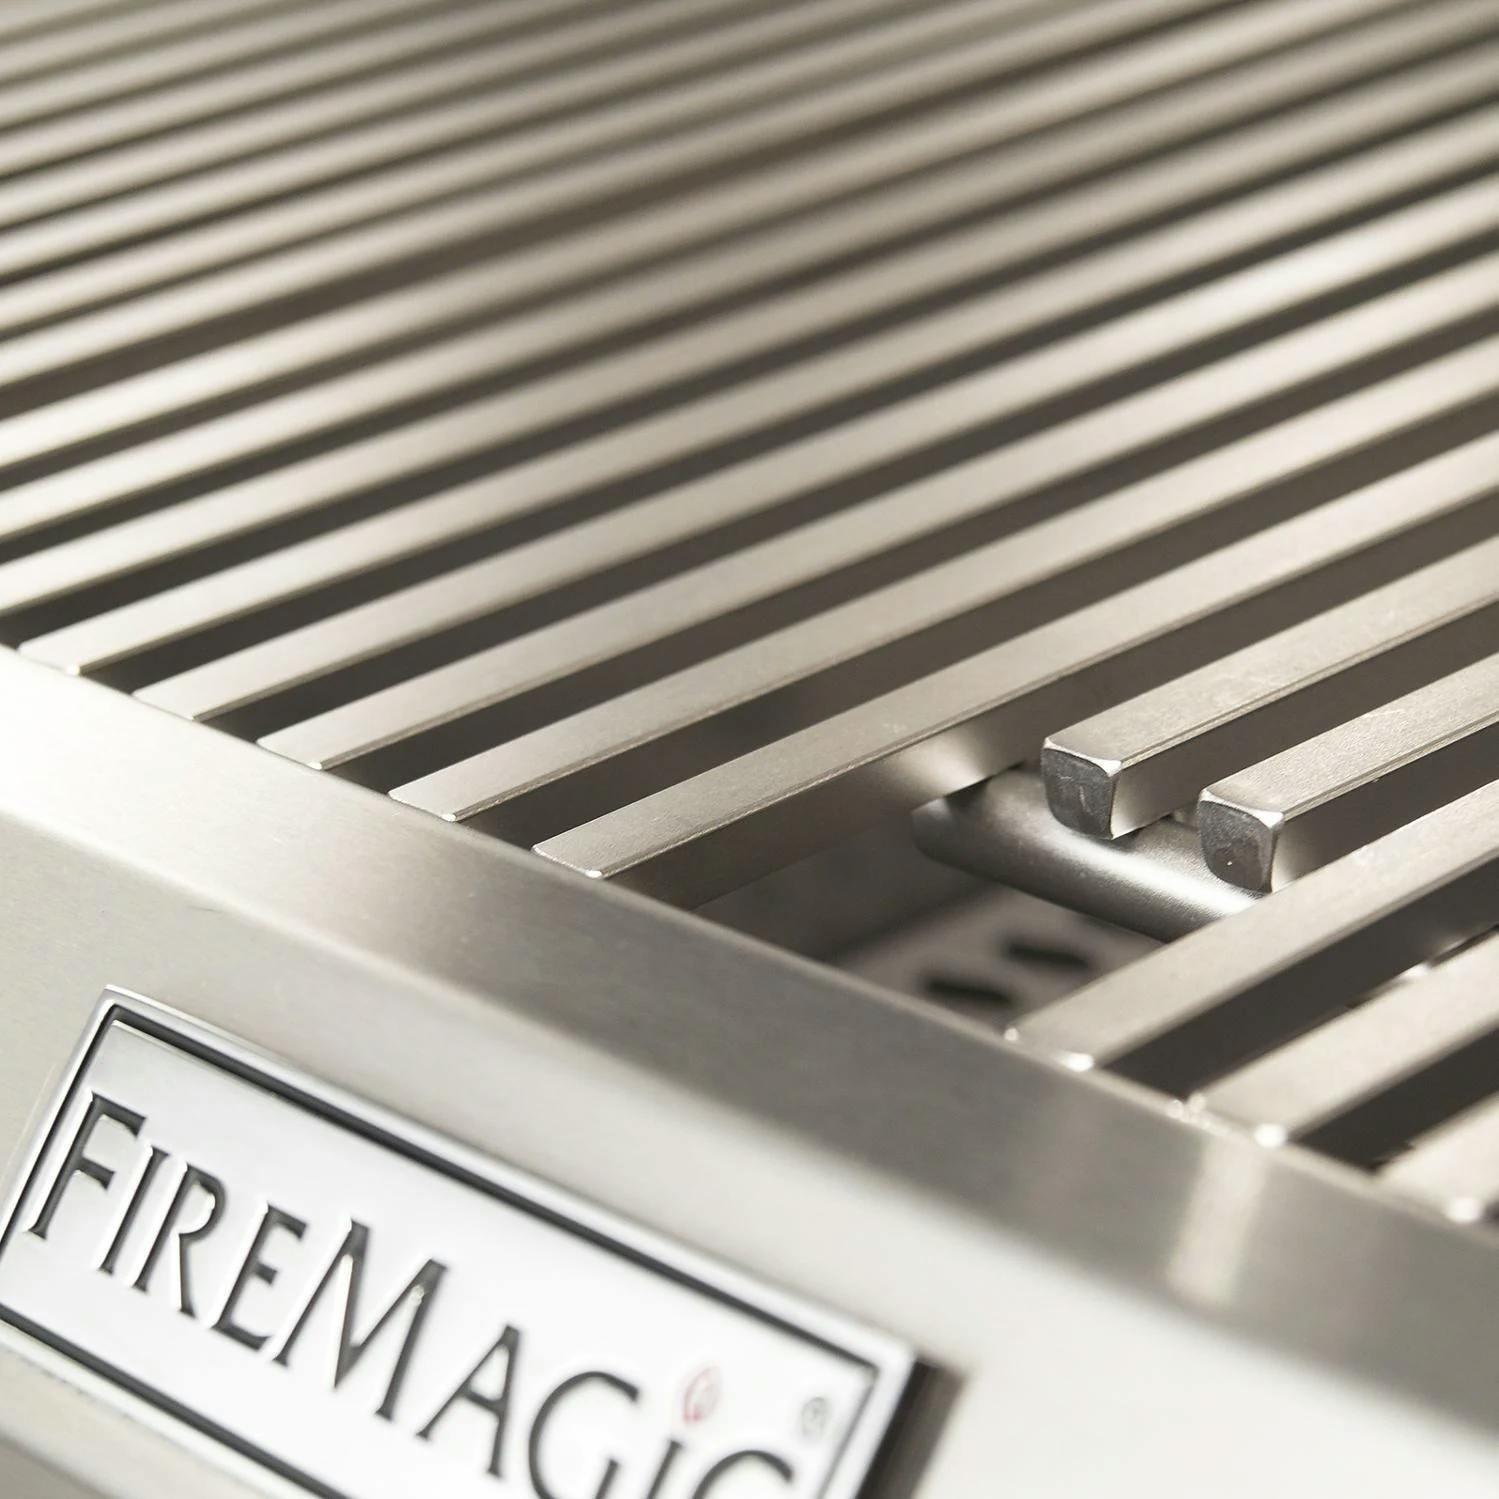 Fire Magic Echelon Diamond Built-in Gas Grill with Rotisserie and Digital Thermometer · 36 in. · Natural Gas